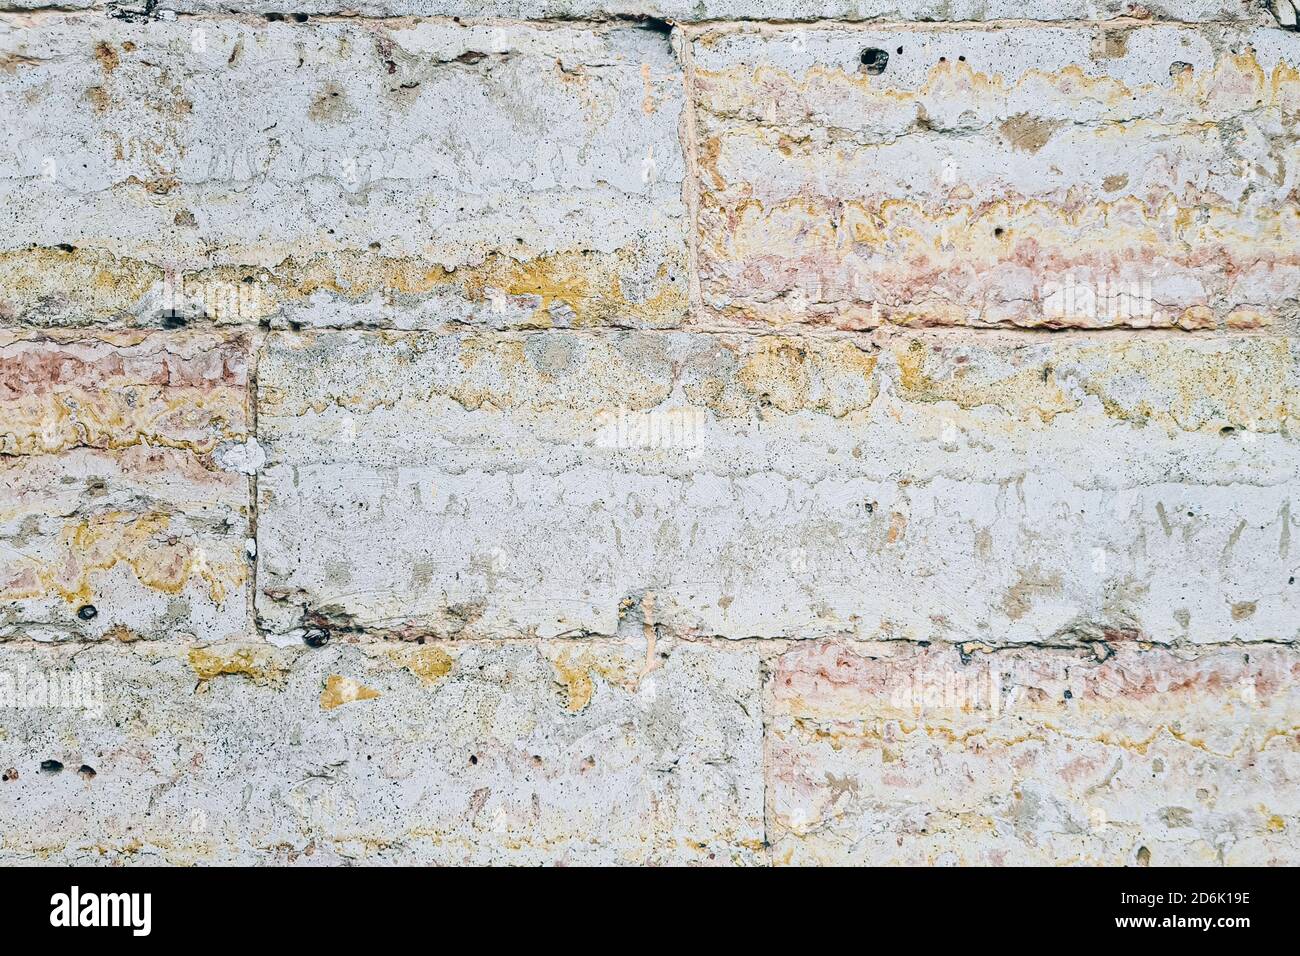 Pink unusual structural plaster . Design element of an old building exteriour. Stock Photo